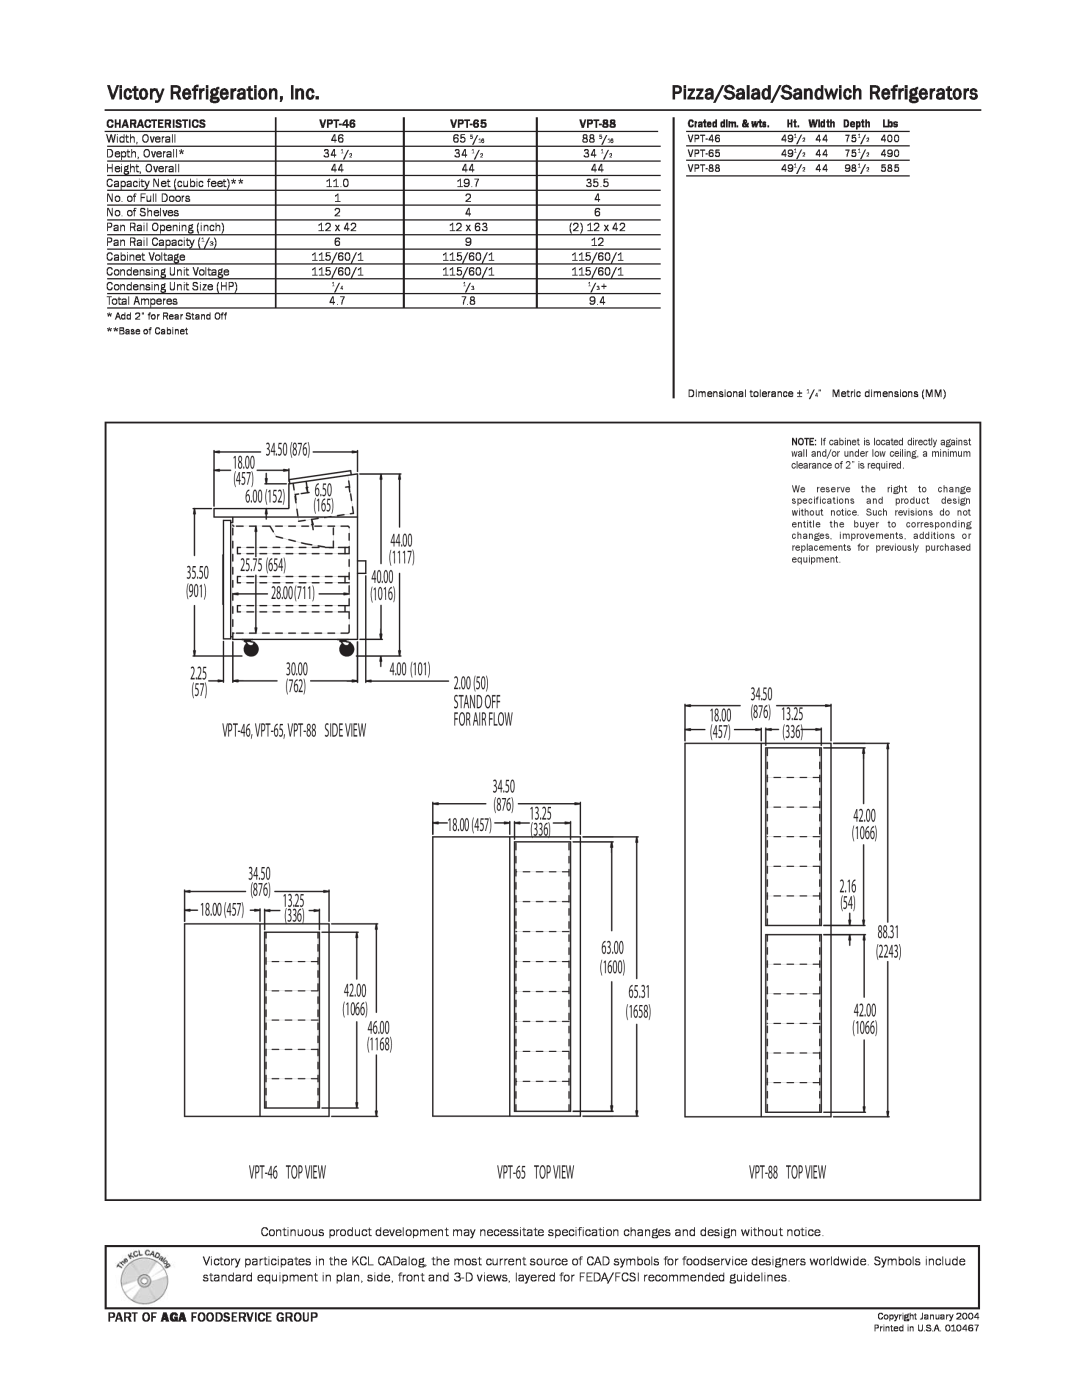 Victory Refrigeration VPT-46 specifications Victory Refrigeration, Inc 